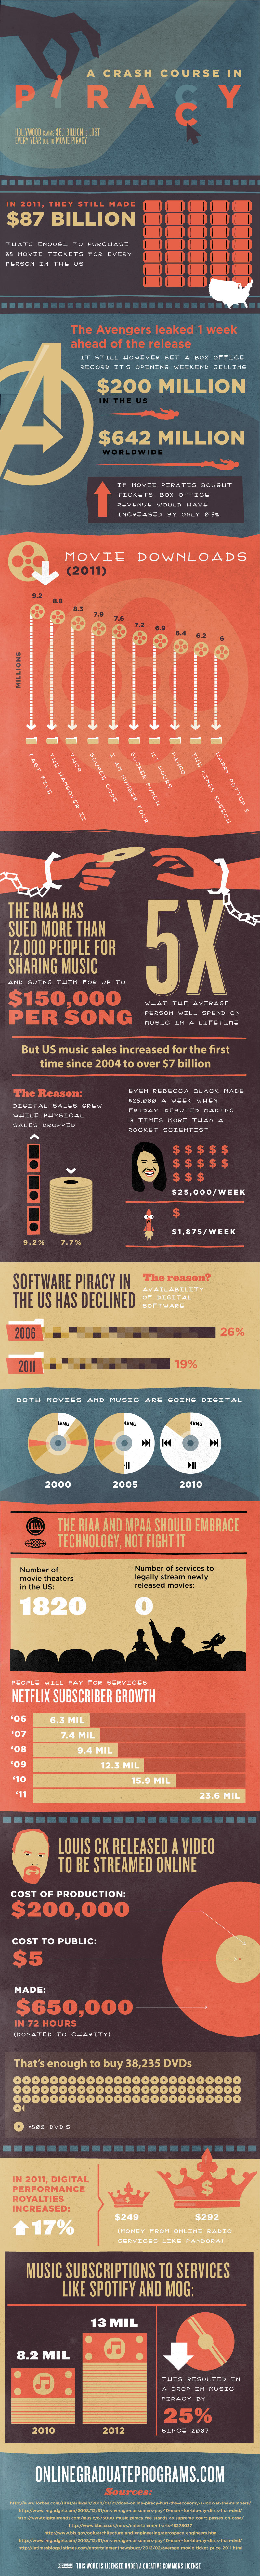 A Crash Course in Online Piracy